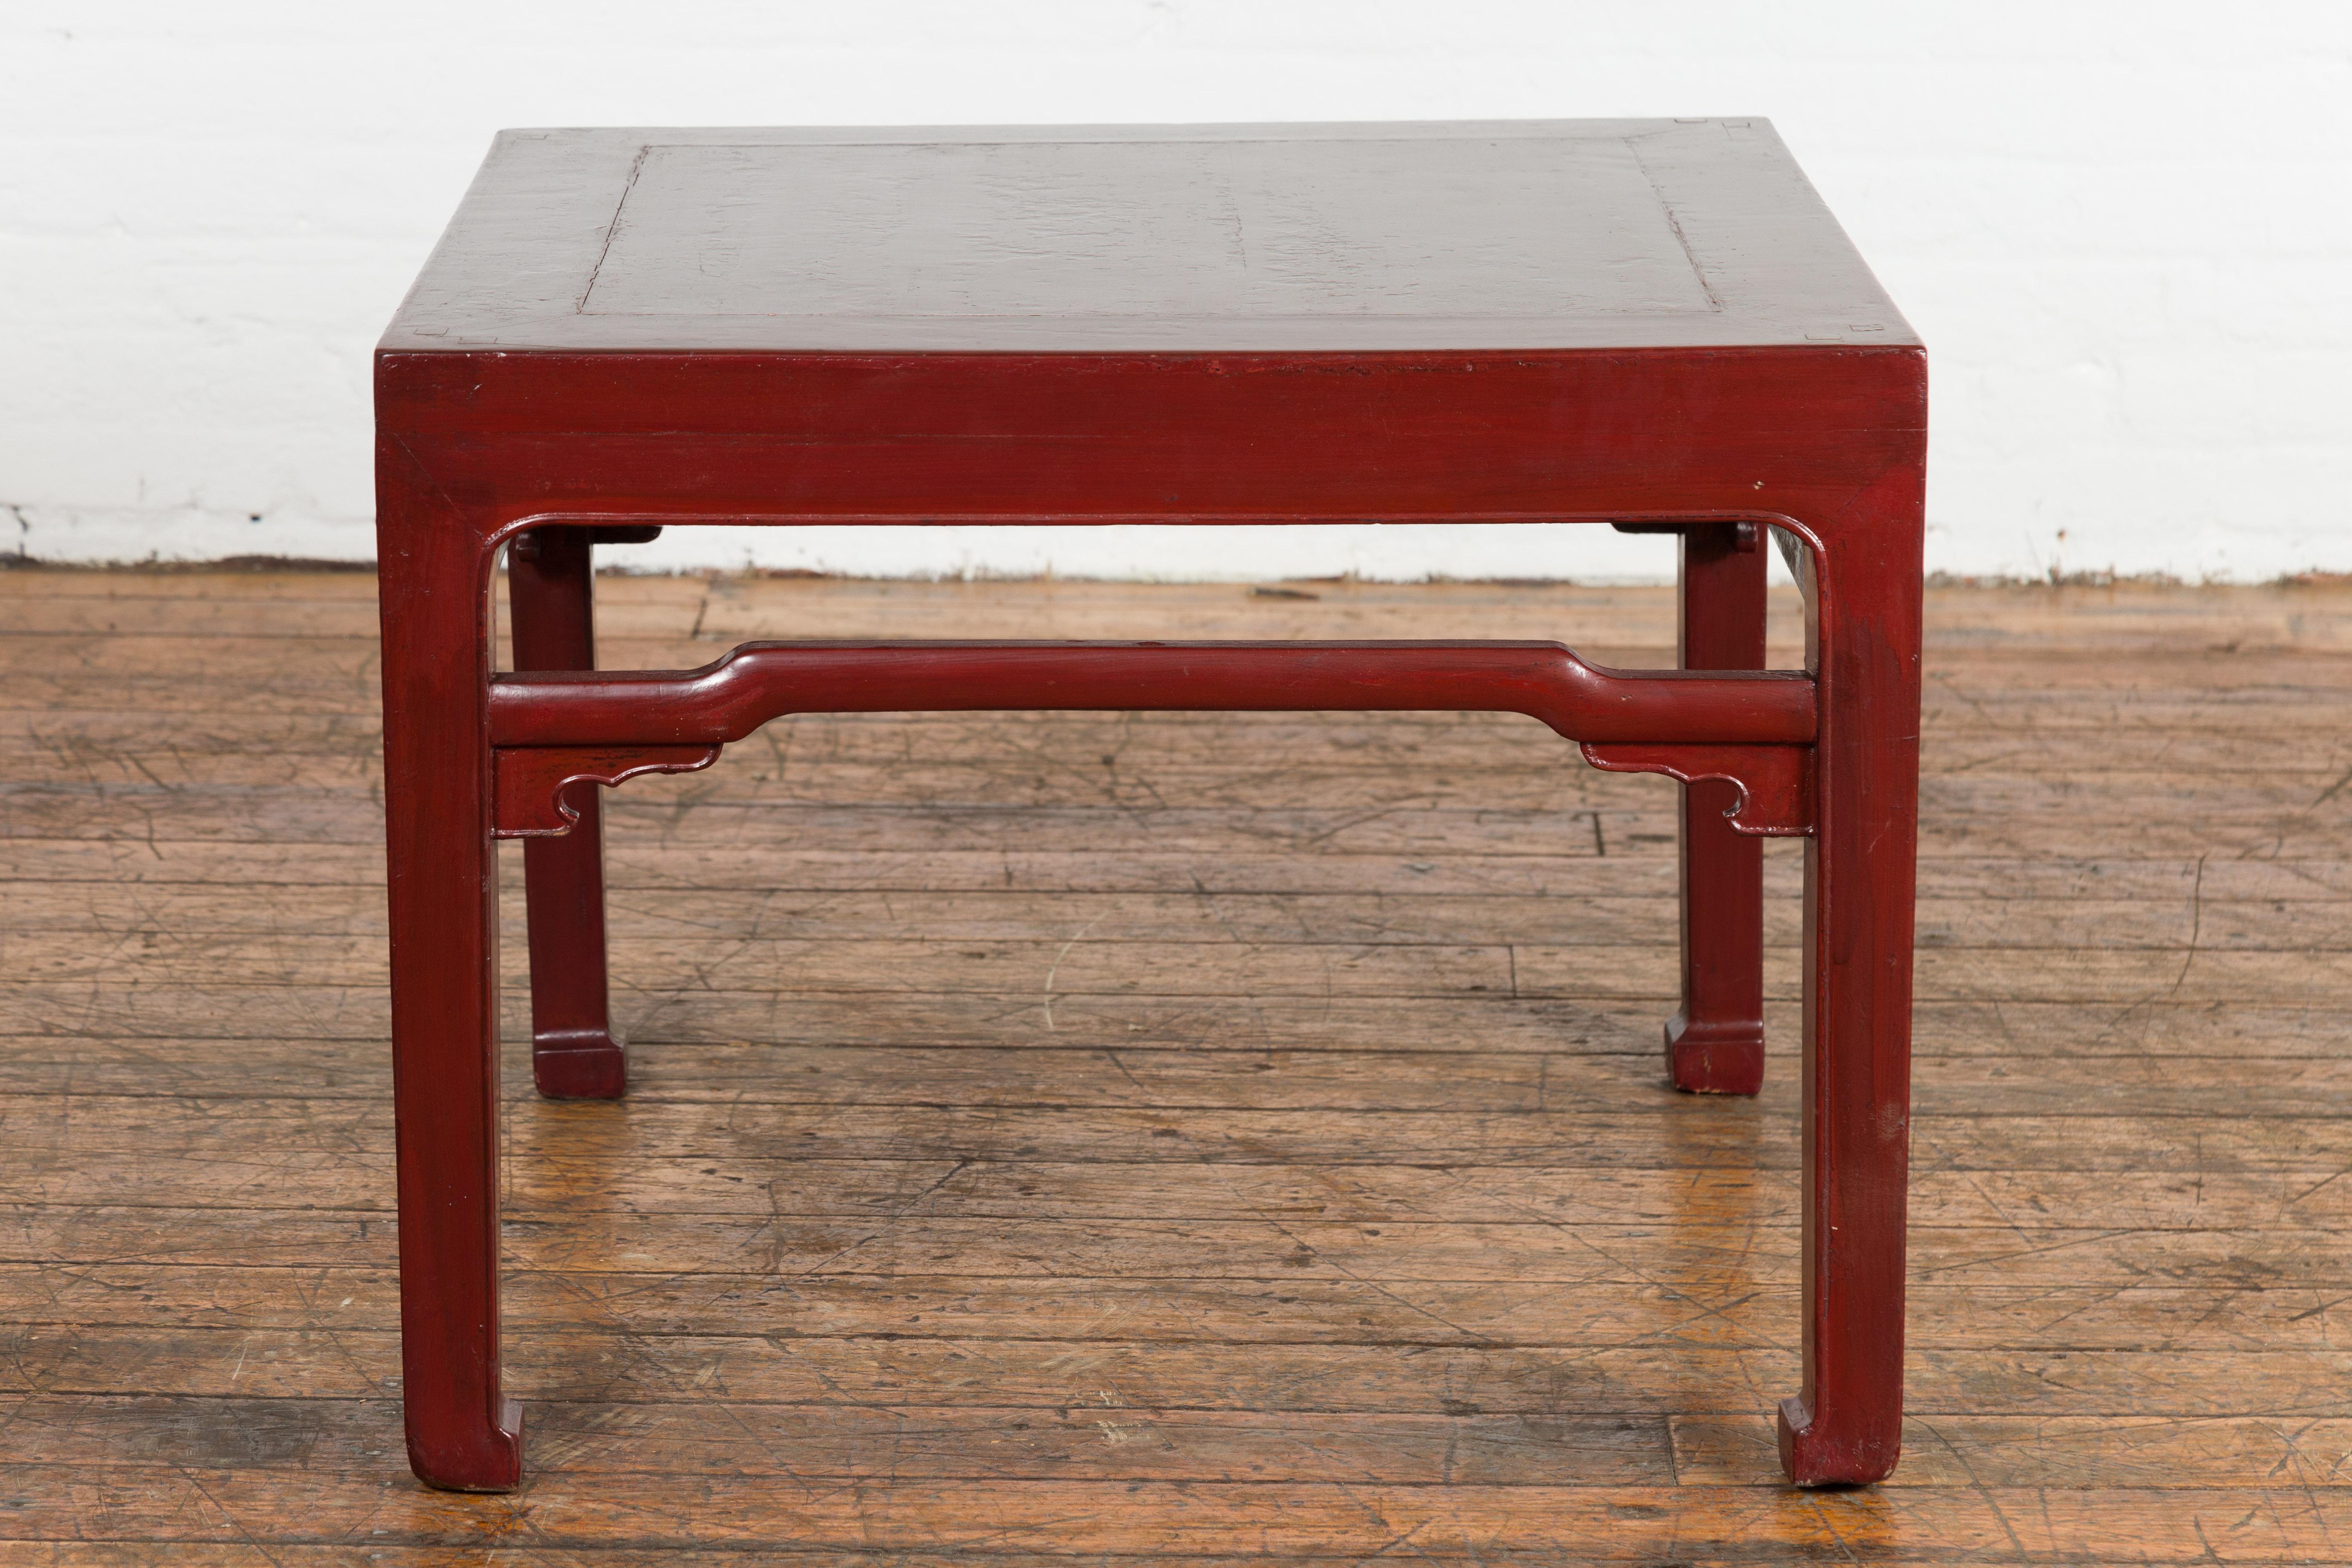 Chinese late Qing Dynasty period low table from the early 20th century, with red lacquer, horse hoof extremities, humpback stretchers and carved spandrels. This antique Qing Dynasty period low table radiates a warm, dark red lacquer. It is a